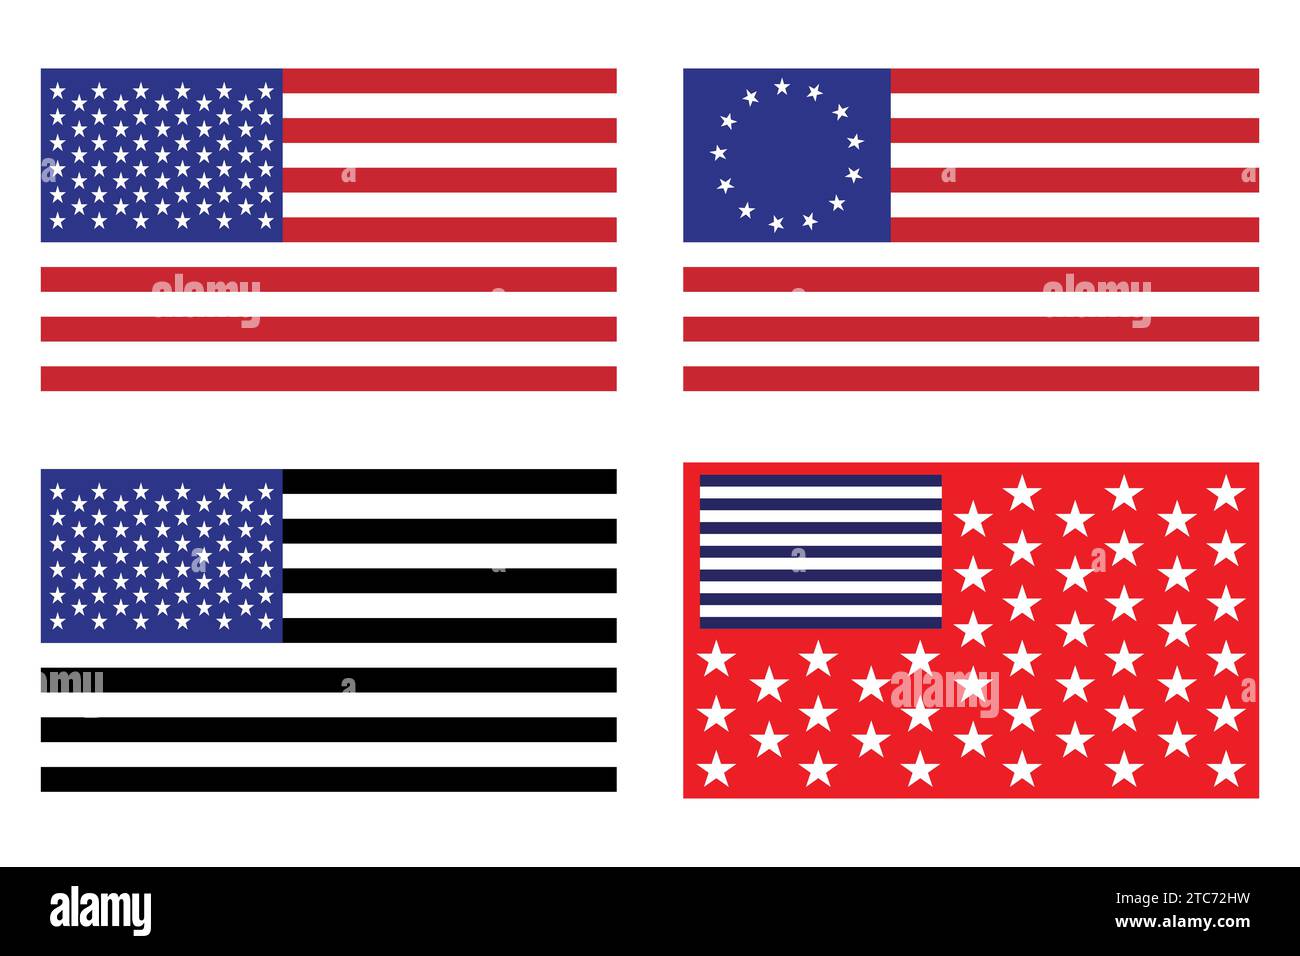 Flag of the United States of America, American flag photos vector illustration. Stock Vector